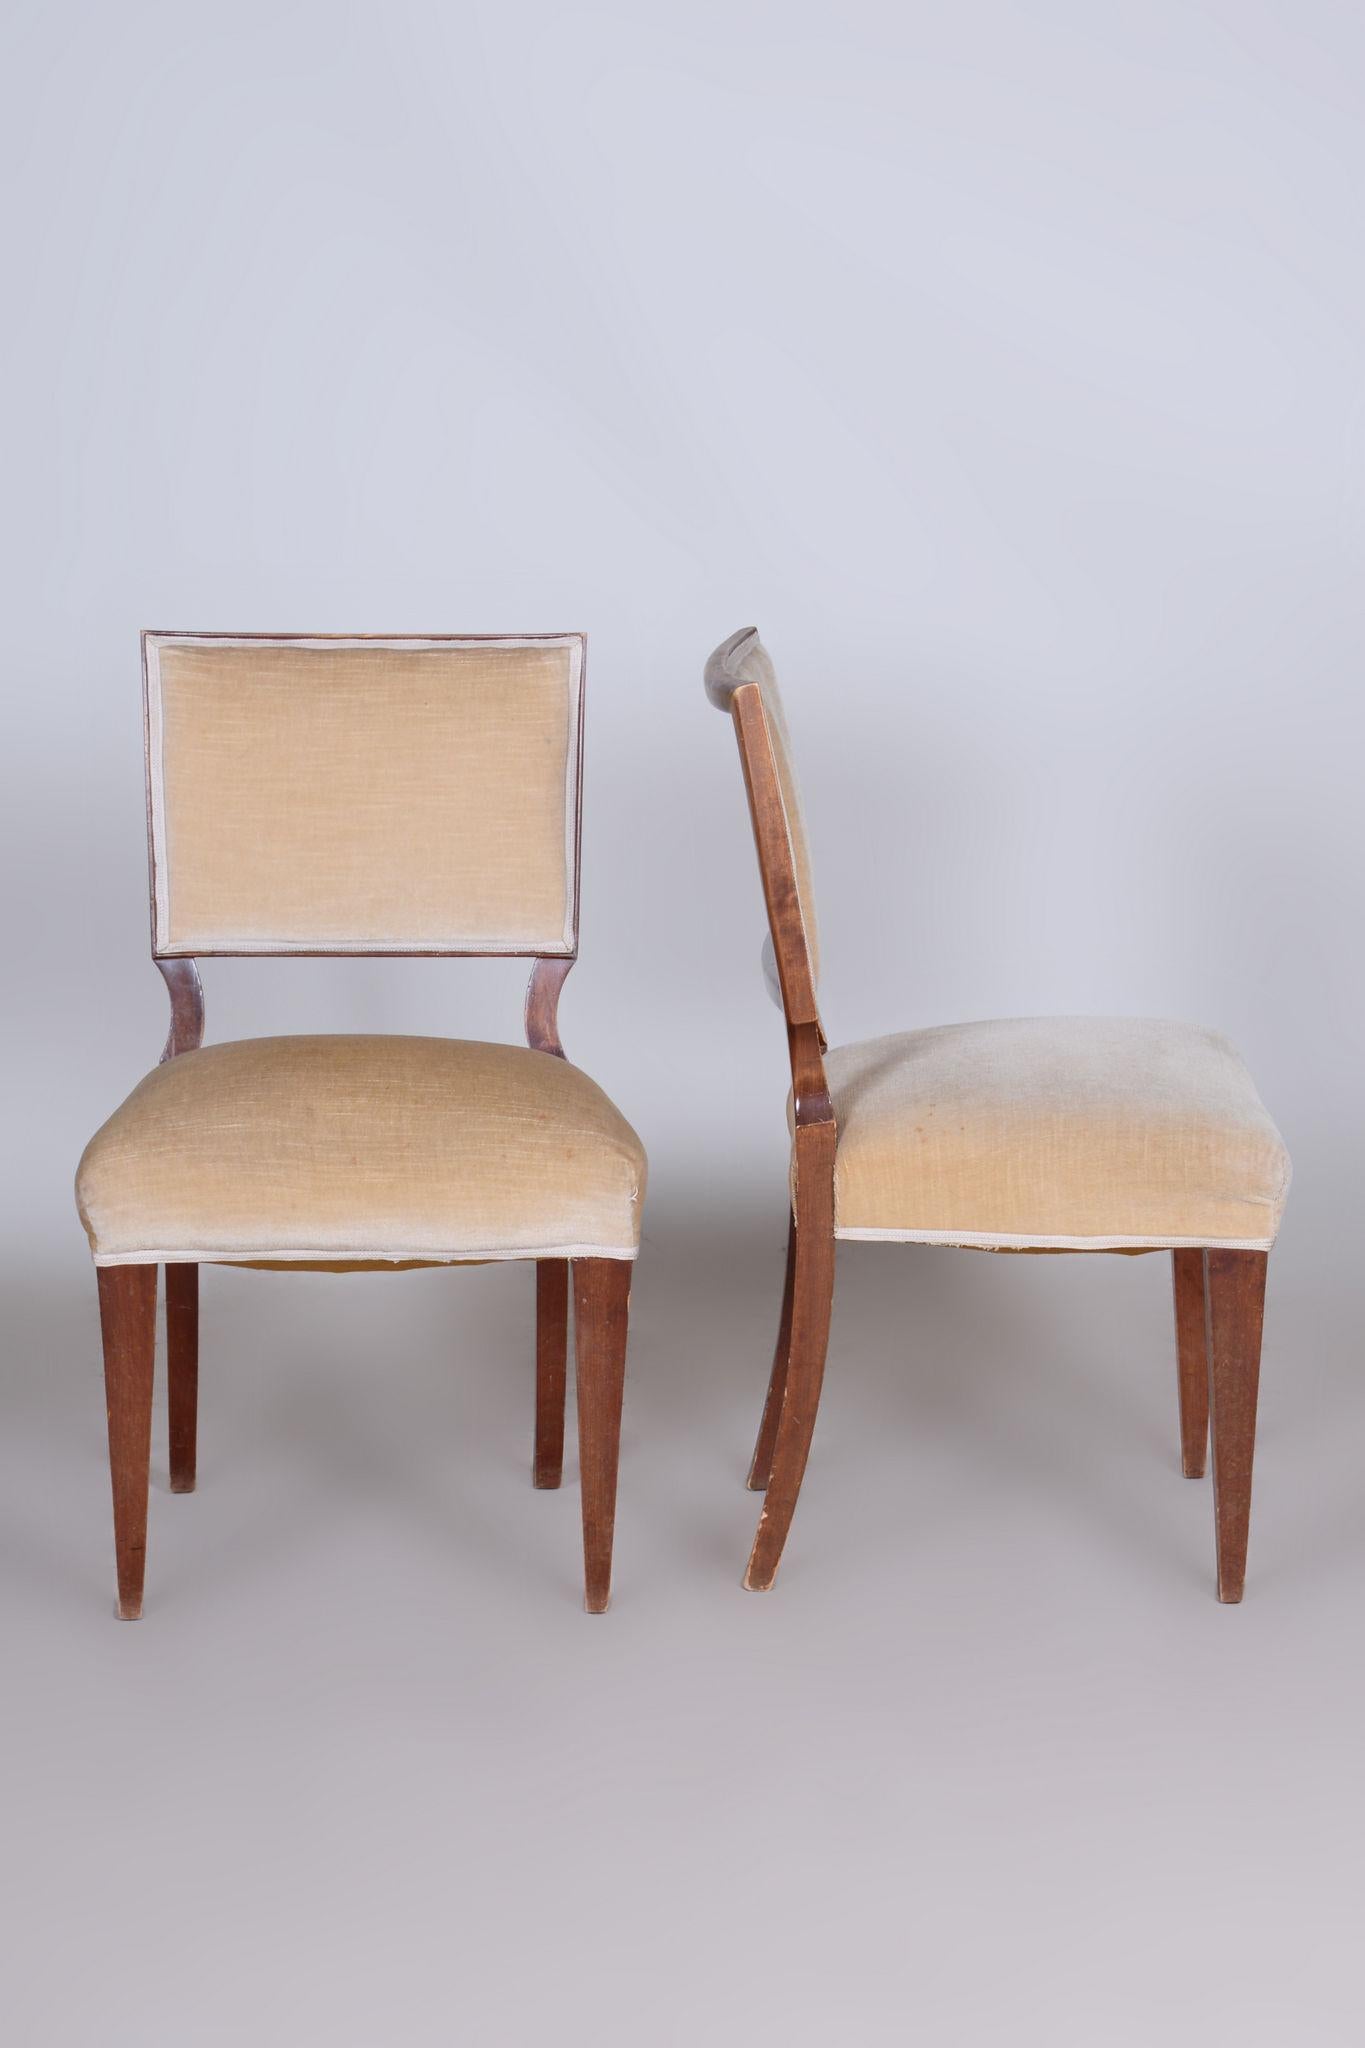 Upholstery Set of Six Original Art Deco Chairs, Solid Walnut, France, 1920s For Sale